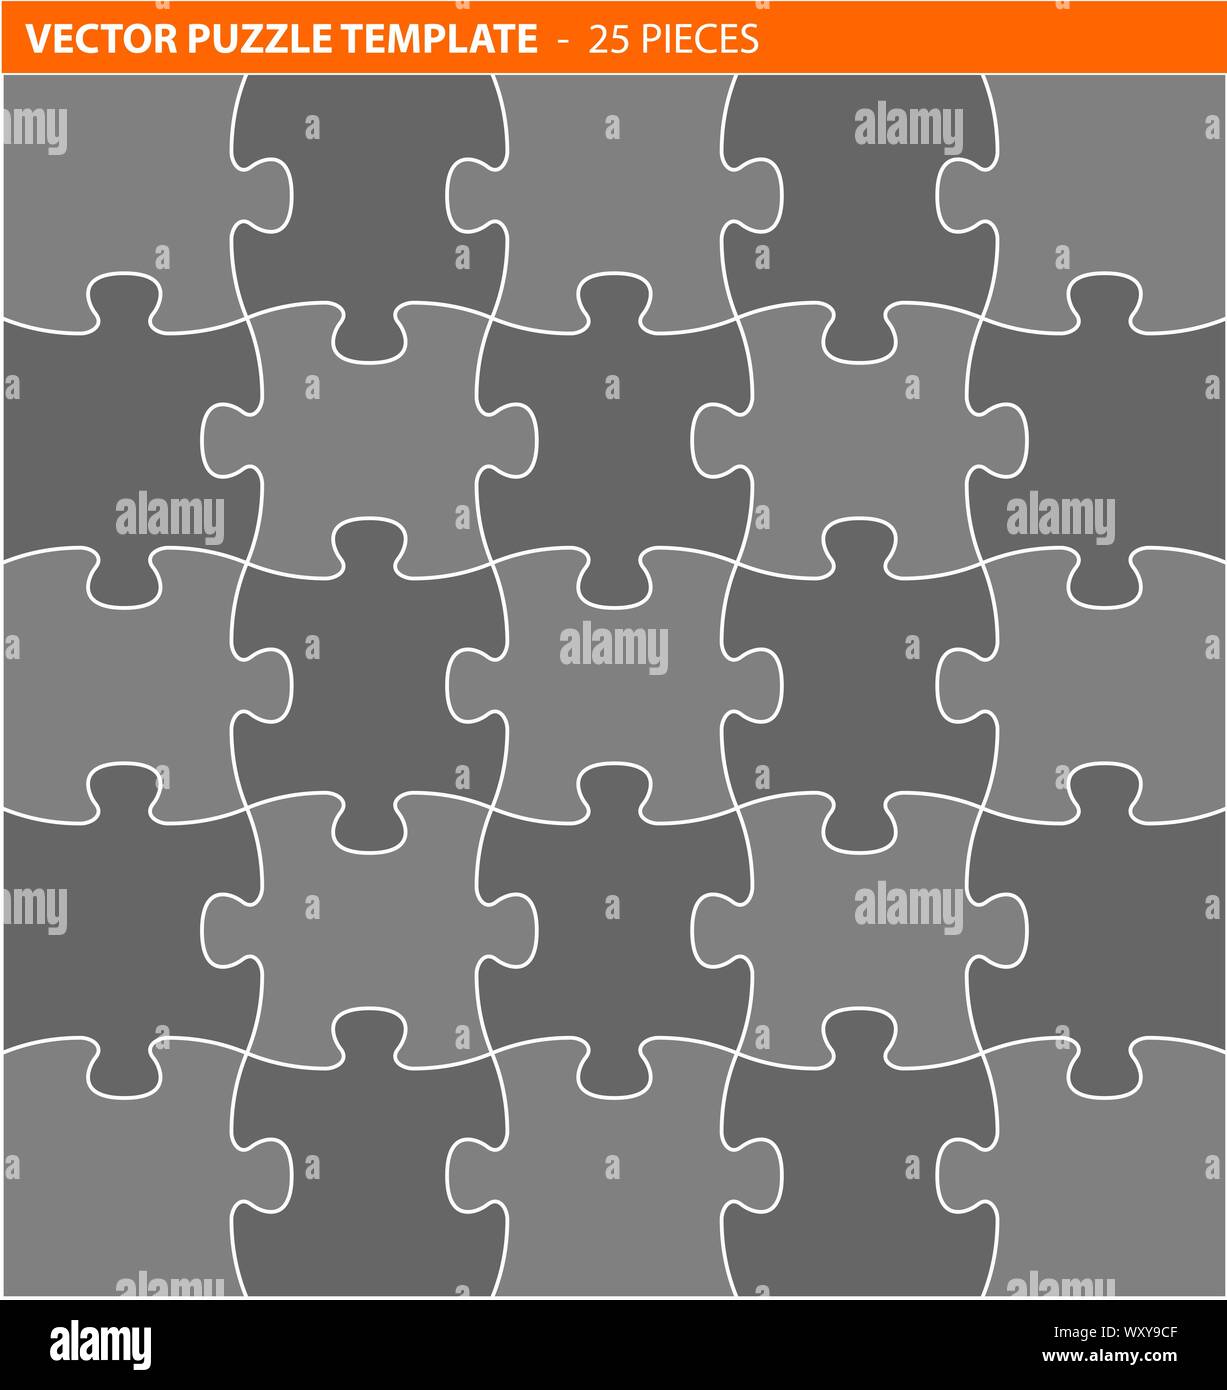 jigsaw puzzle template